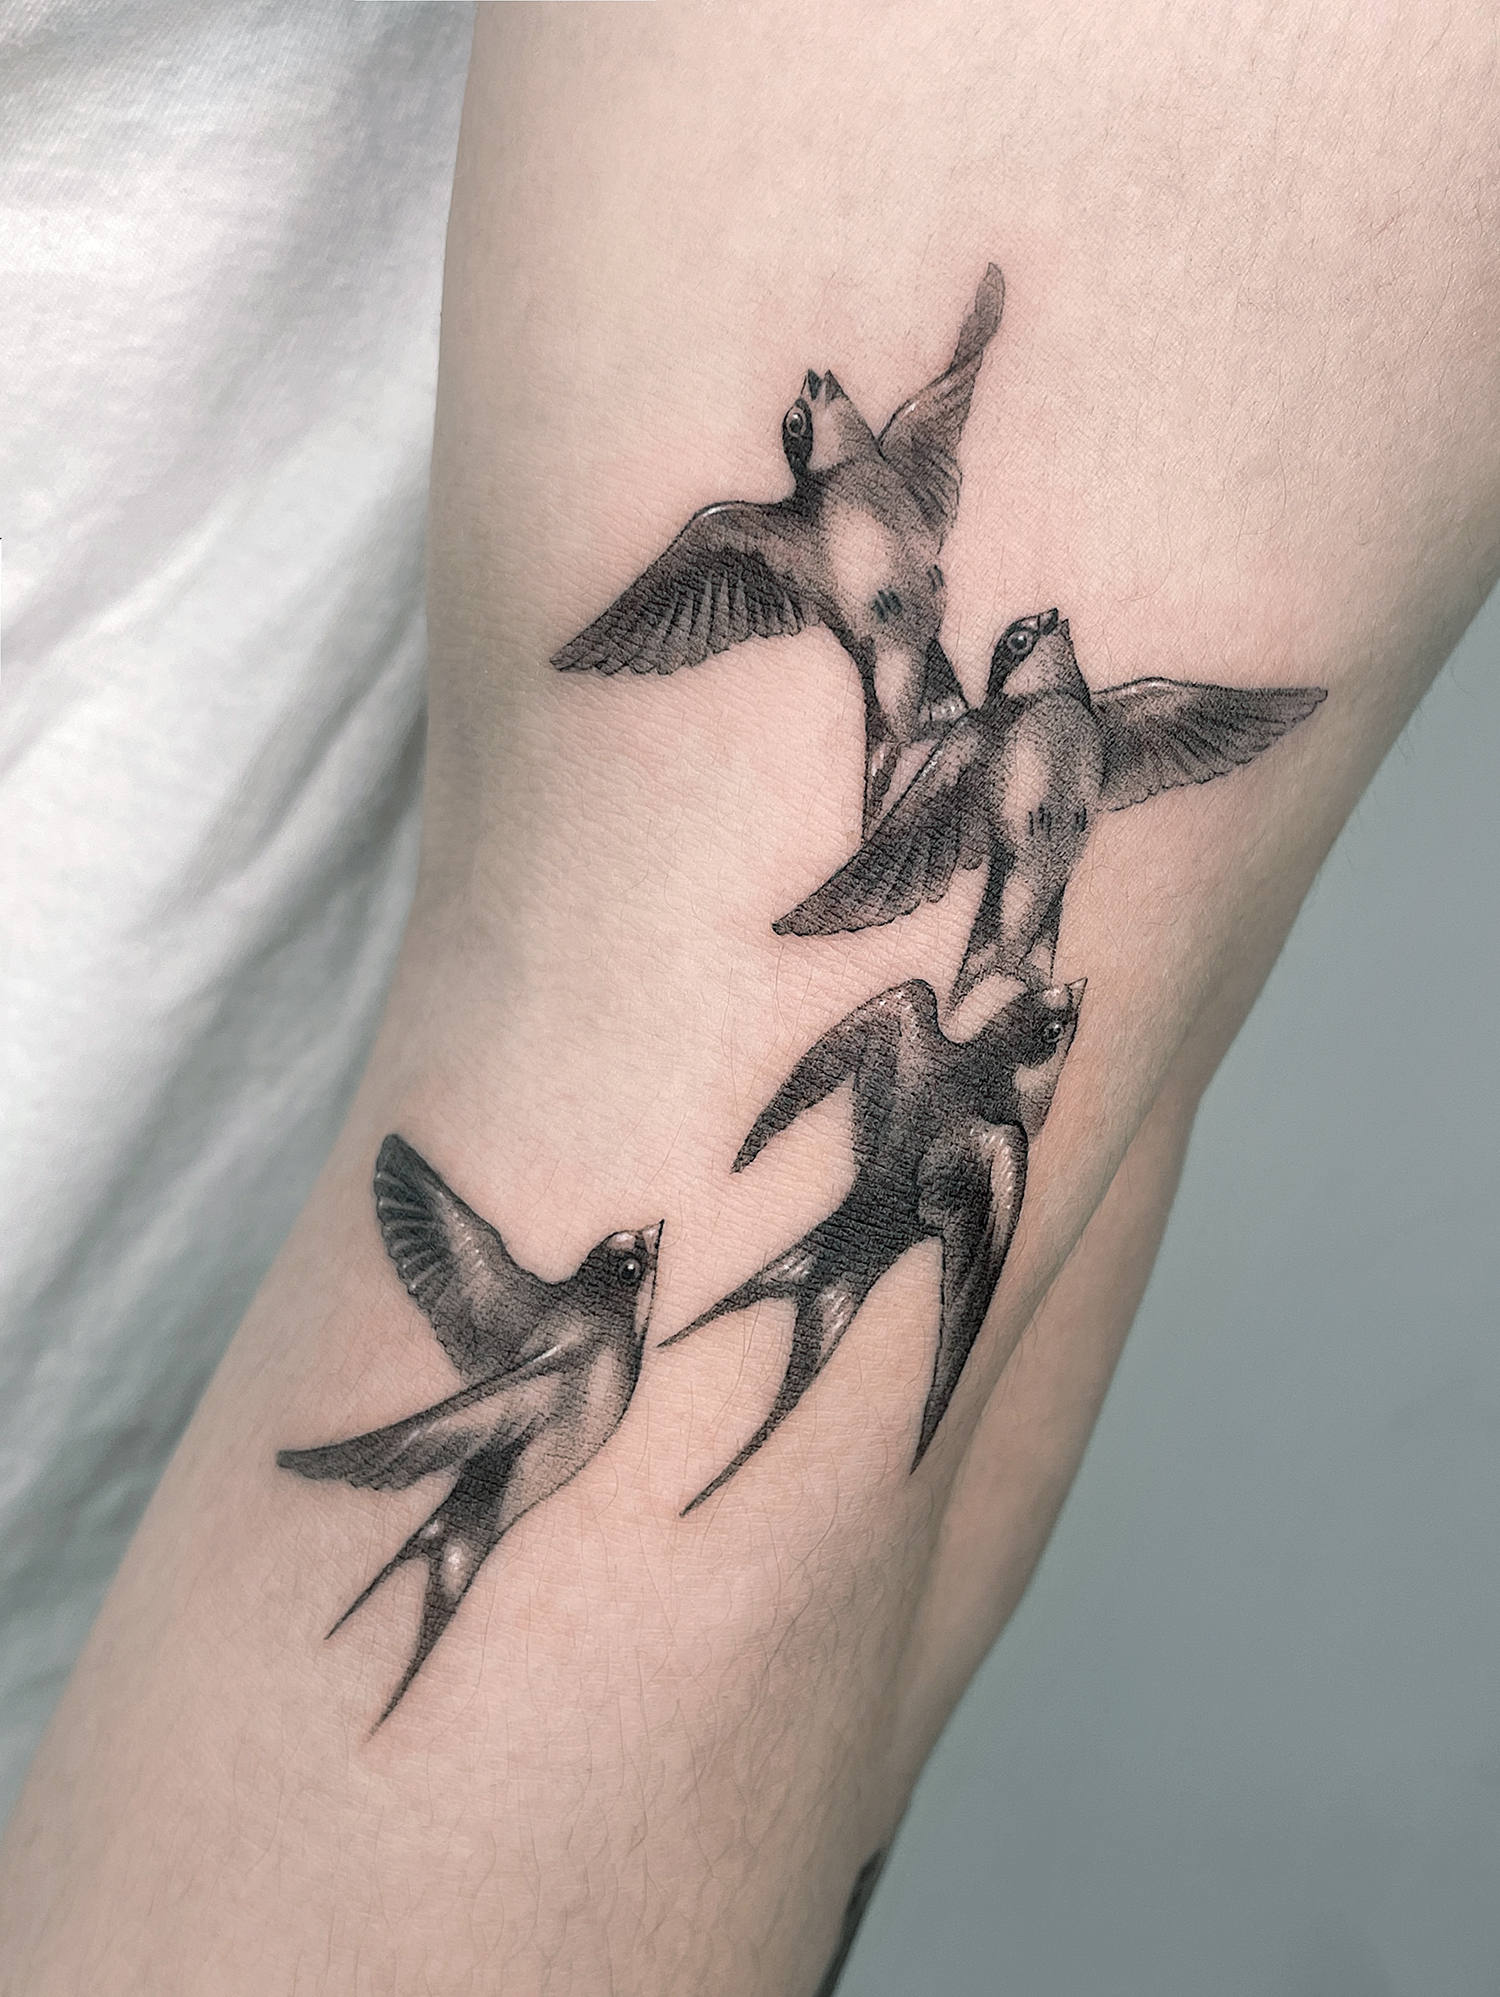 classic swallow tattoo in black and white inks